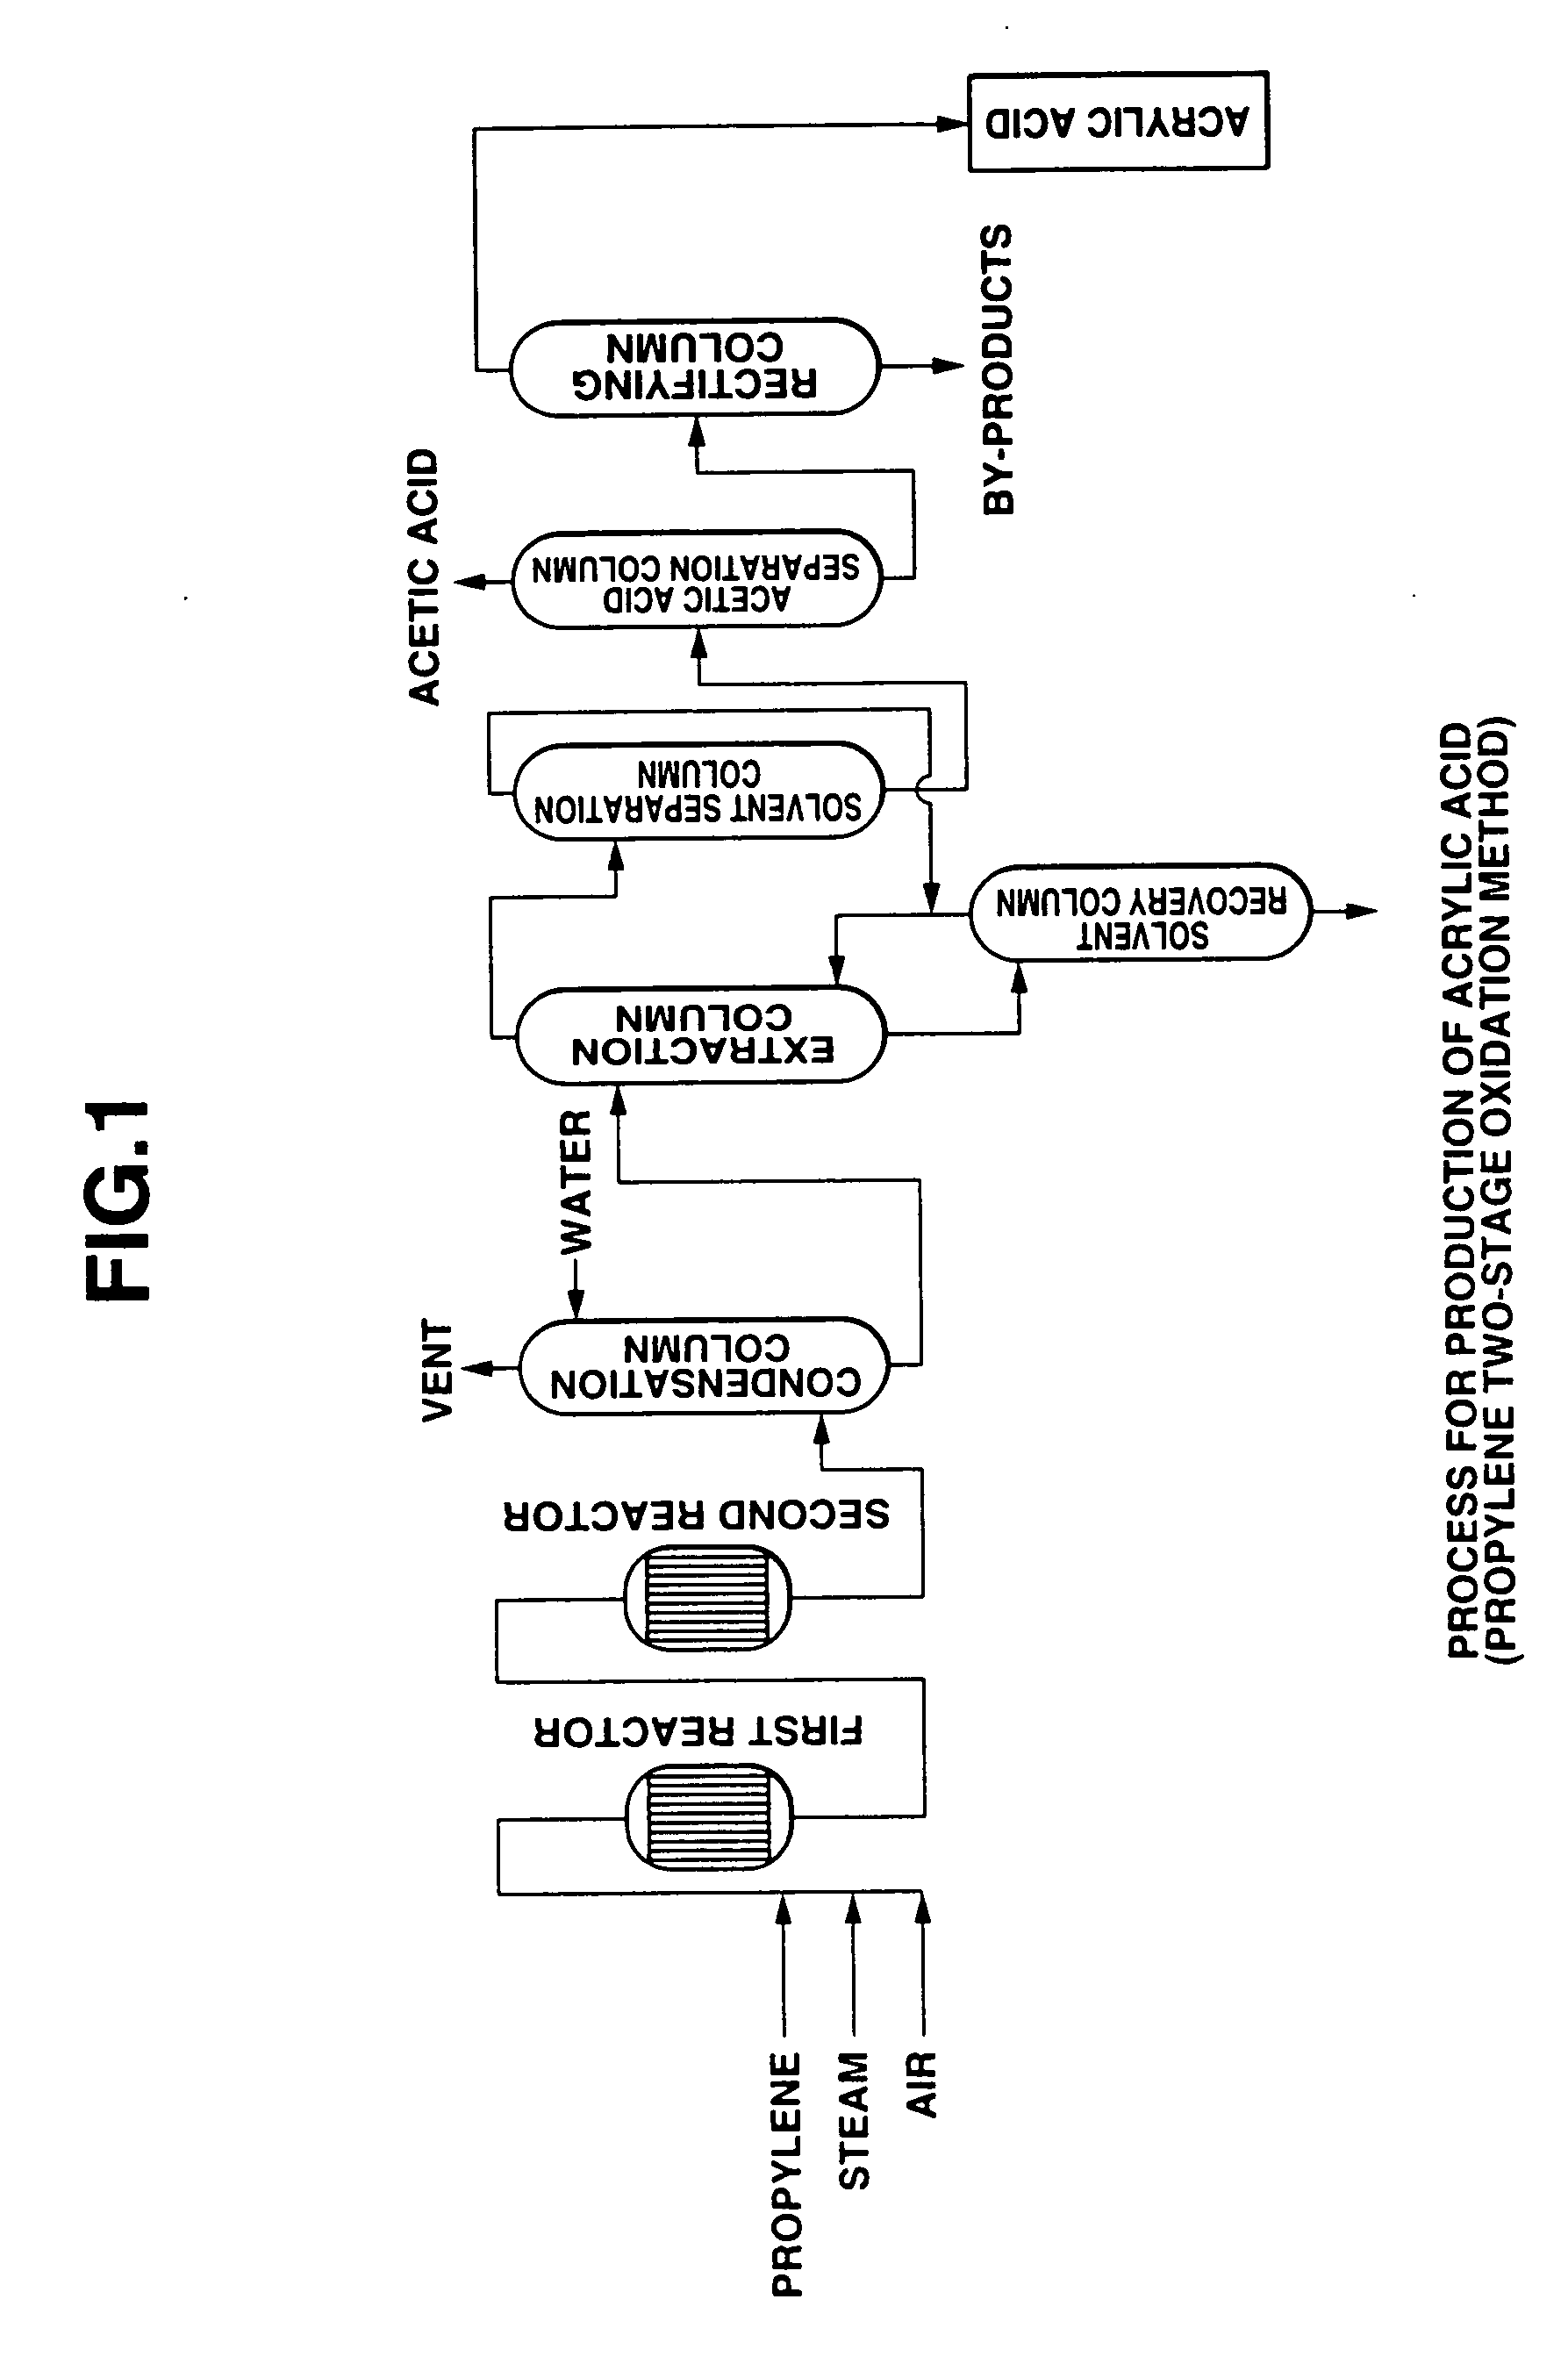 Oxidation reactor, process for producing (meth) acrylic acids, and method for analyzing easily-polymerizable compounds